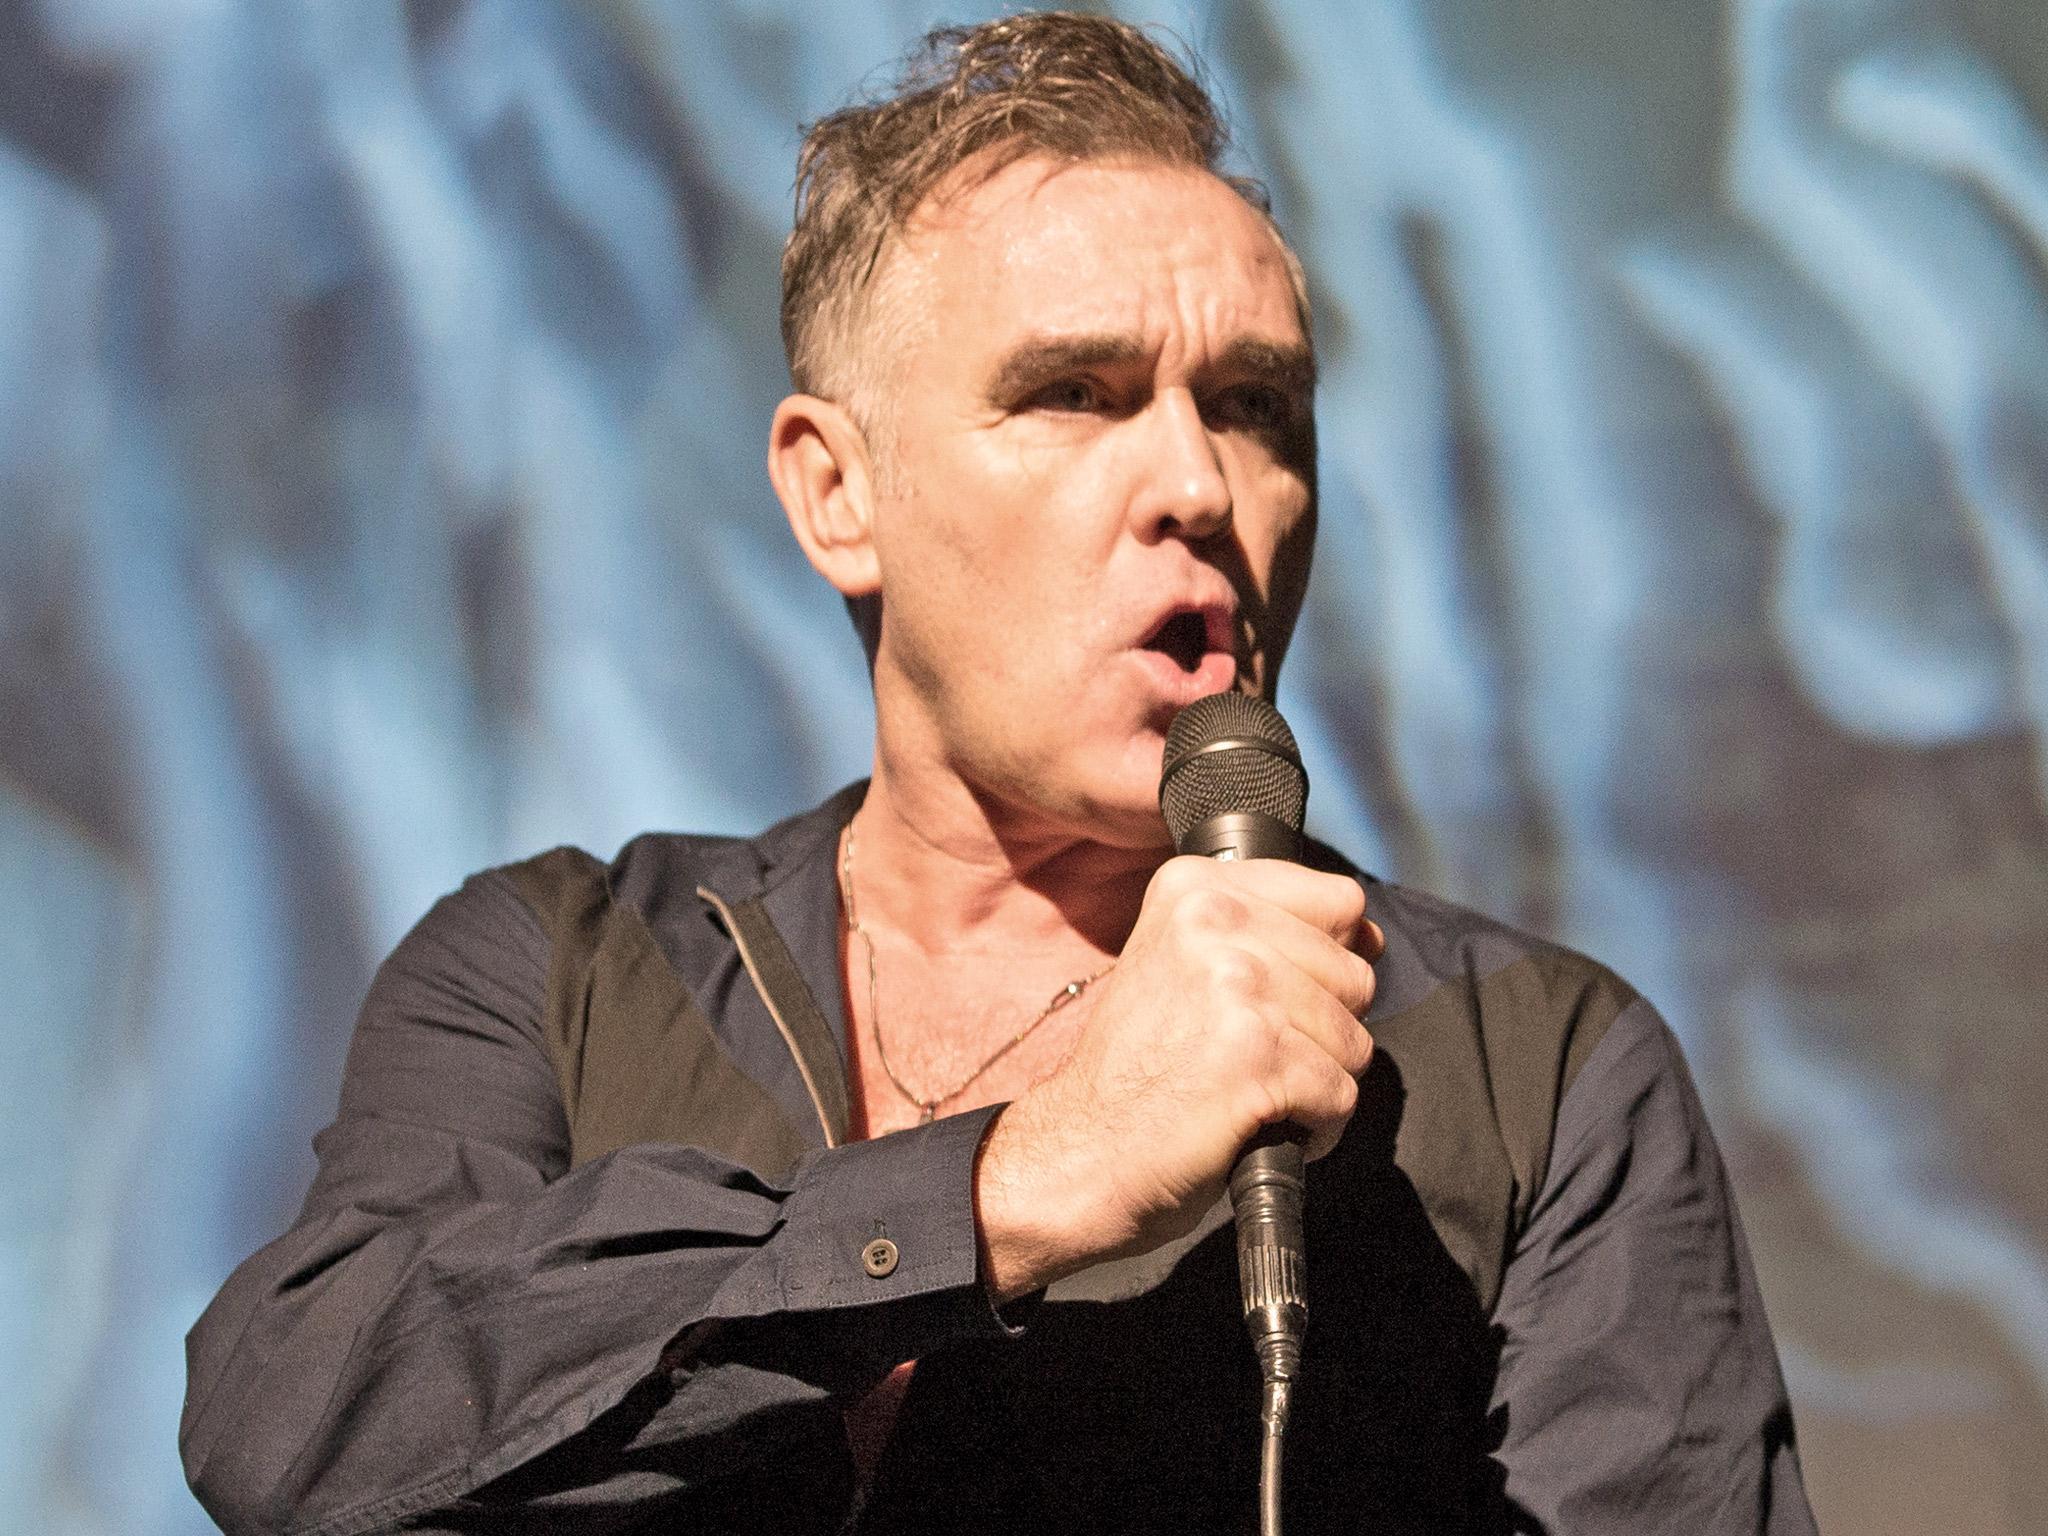 Morrissey has cancelled his US tour